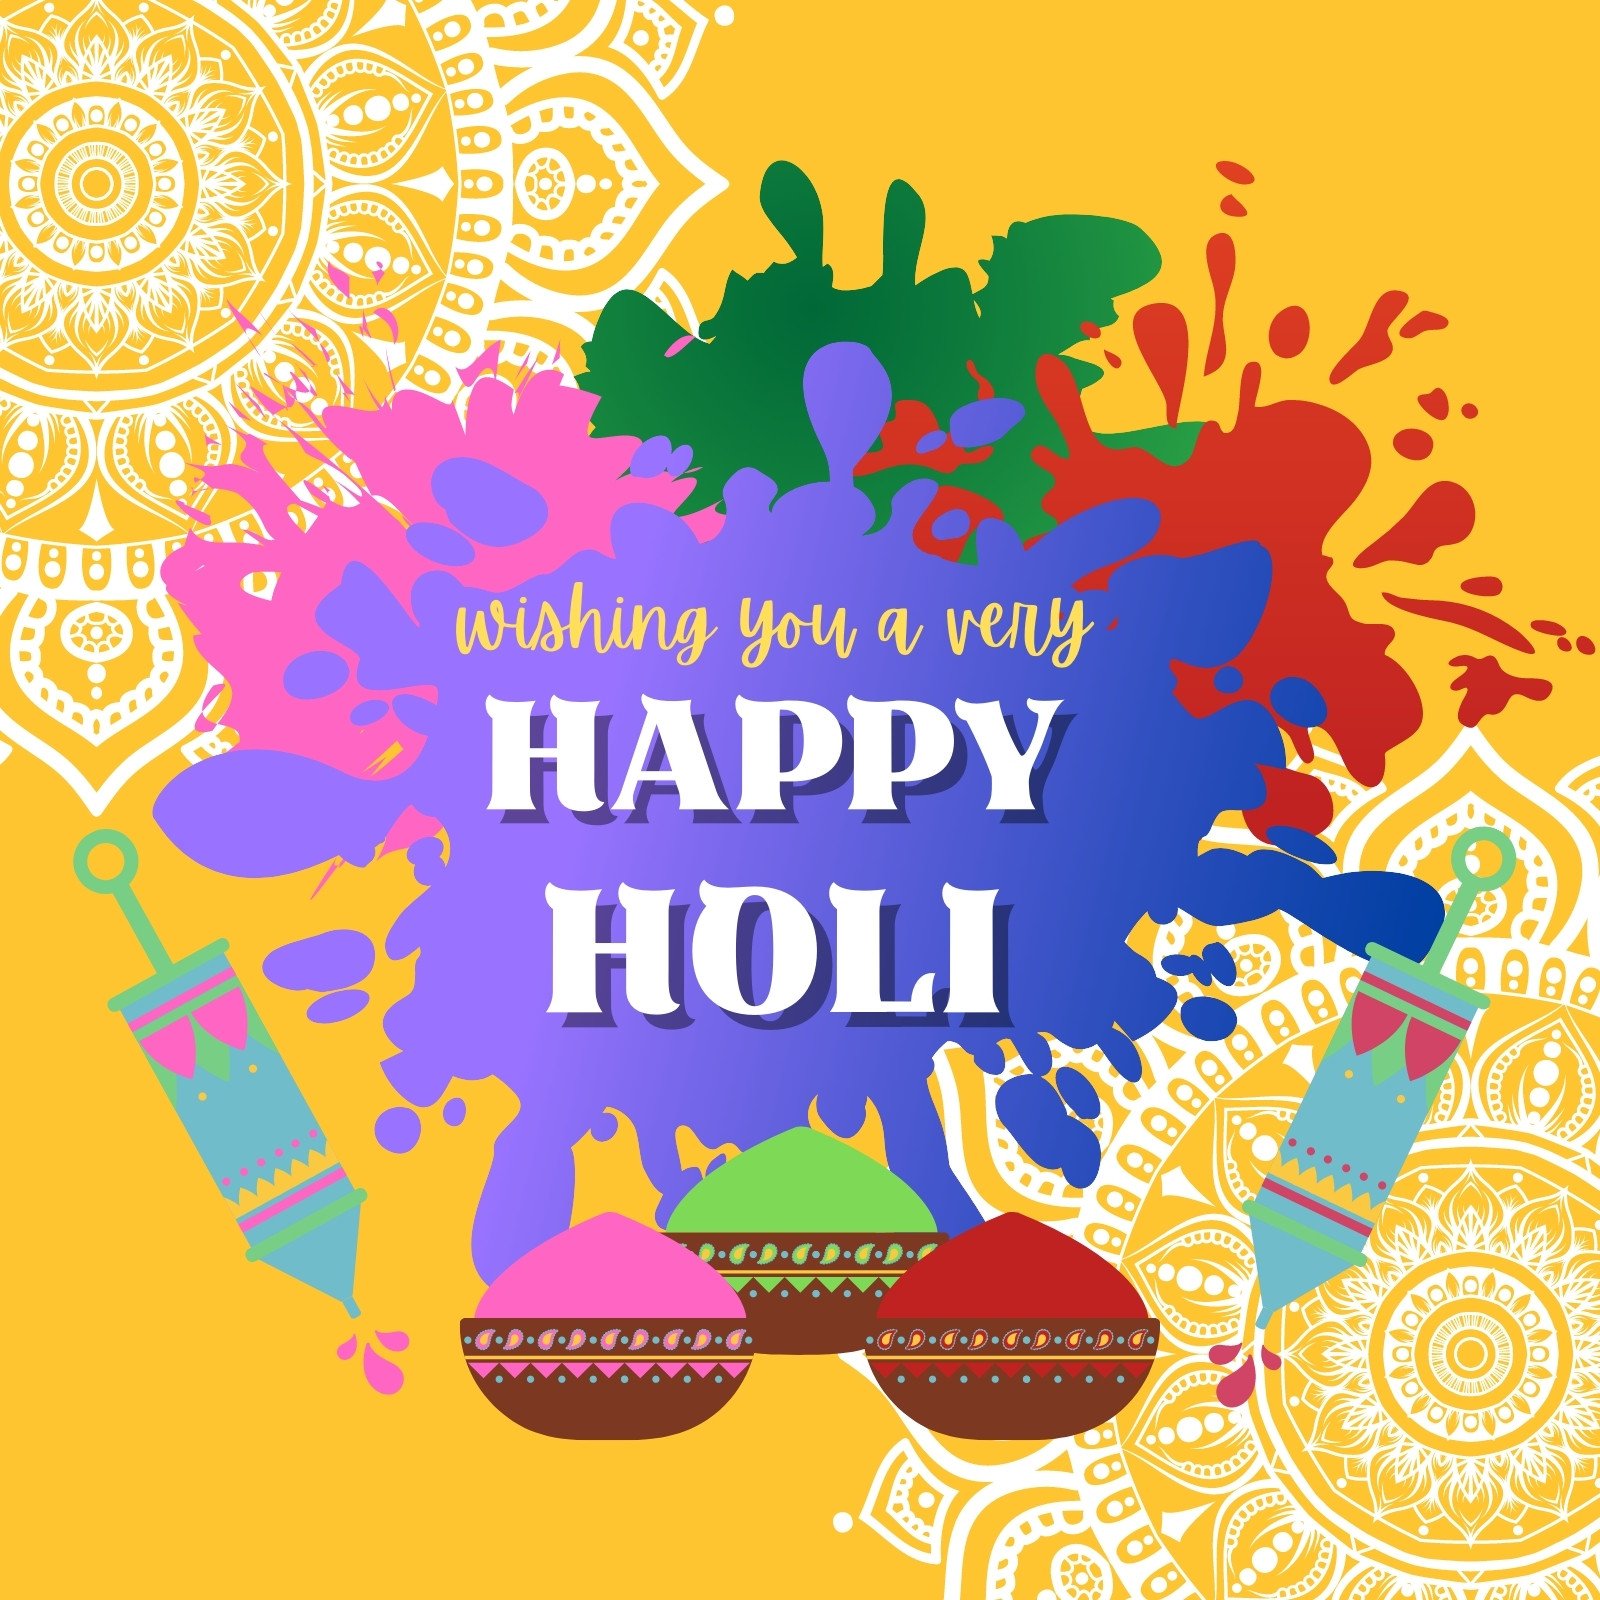 PPJ ® - HAPPY HOLI (30 Pcs.) (HOLI) PAPER CARRY BAG, 10 Inch X 14 Inch X 4  Inch for HOLI FUNCTION/RETURN GIFTS/HOLI/GIFT BAGS/GIFT COVERS(Pack of 30)  : Amazon.in: Home & Kitchen